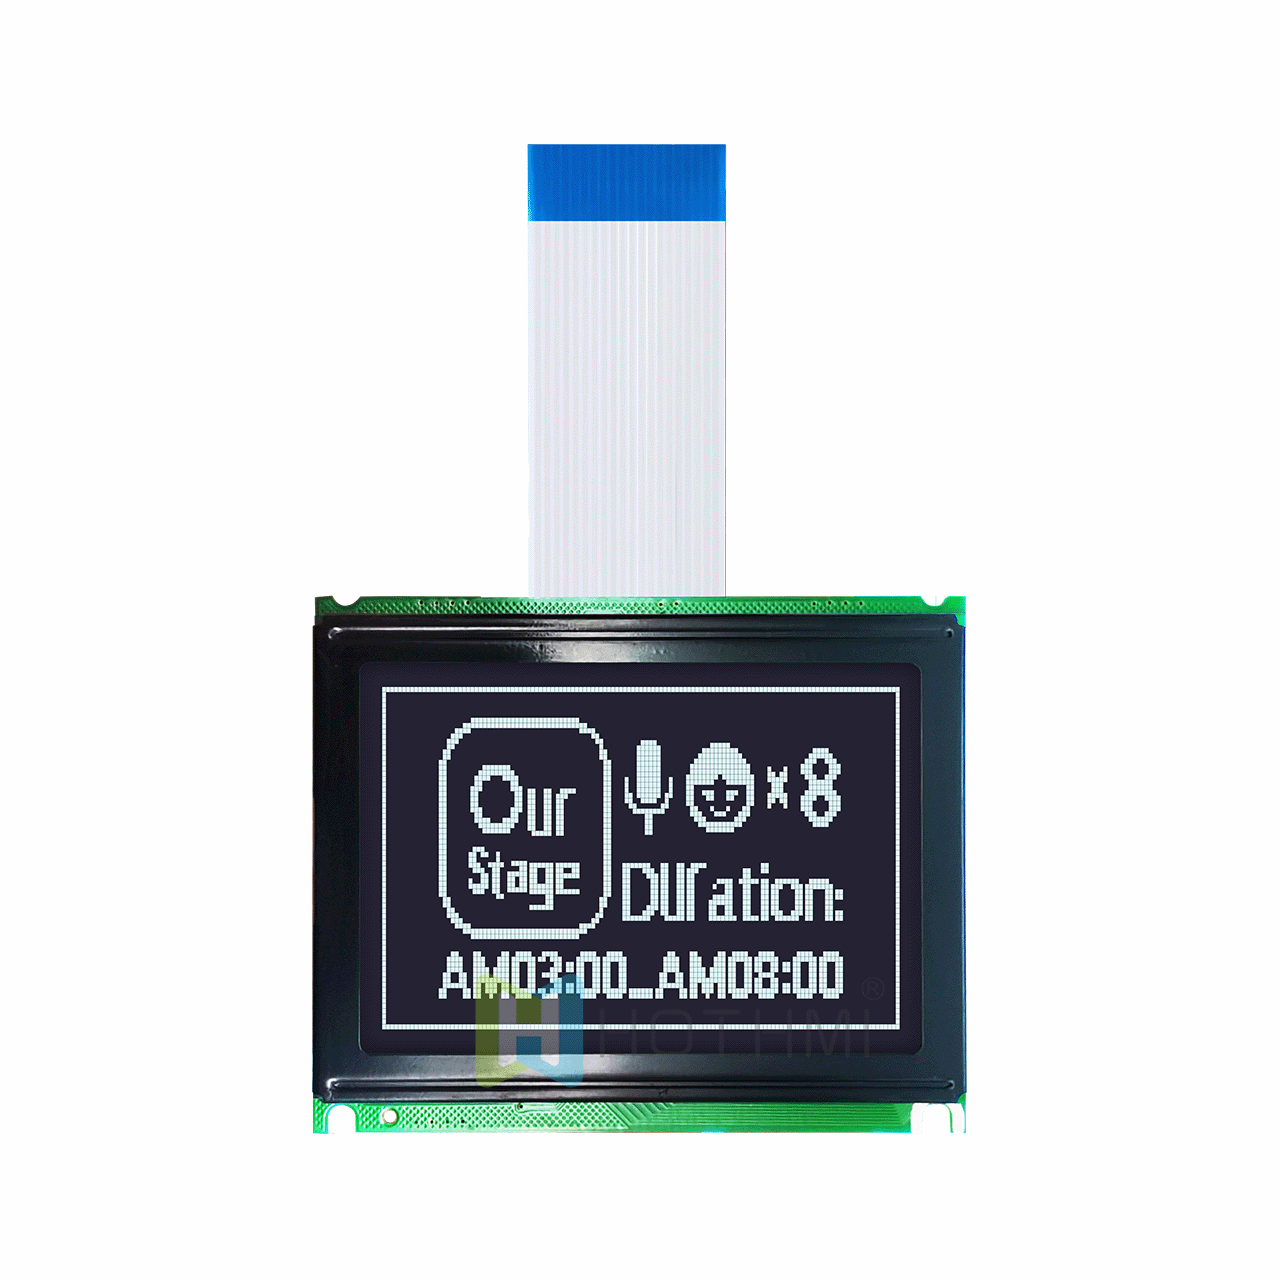 3 inch 128x64 LCD Graphic Display Module | 12864 Graphic LCD Module | DFSTN Negative Display | White on Black | Transflective Polarizer